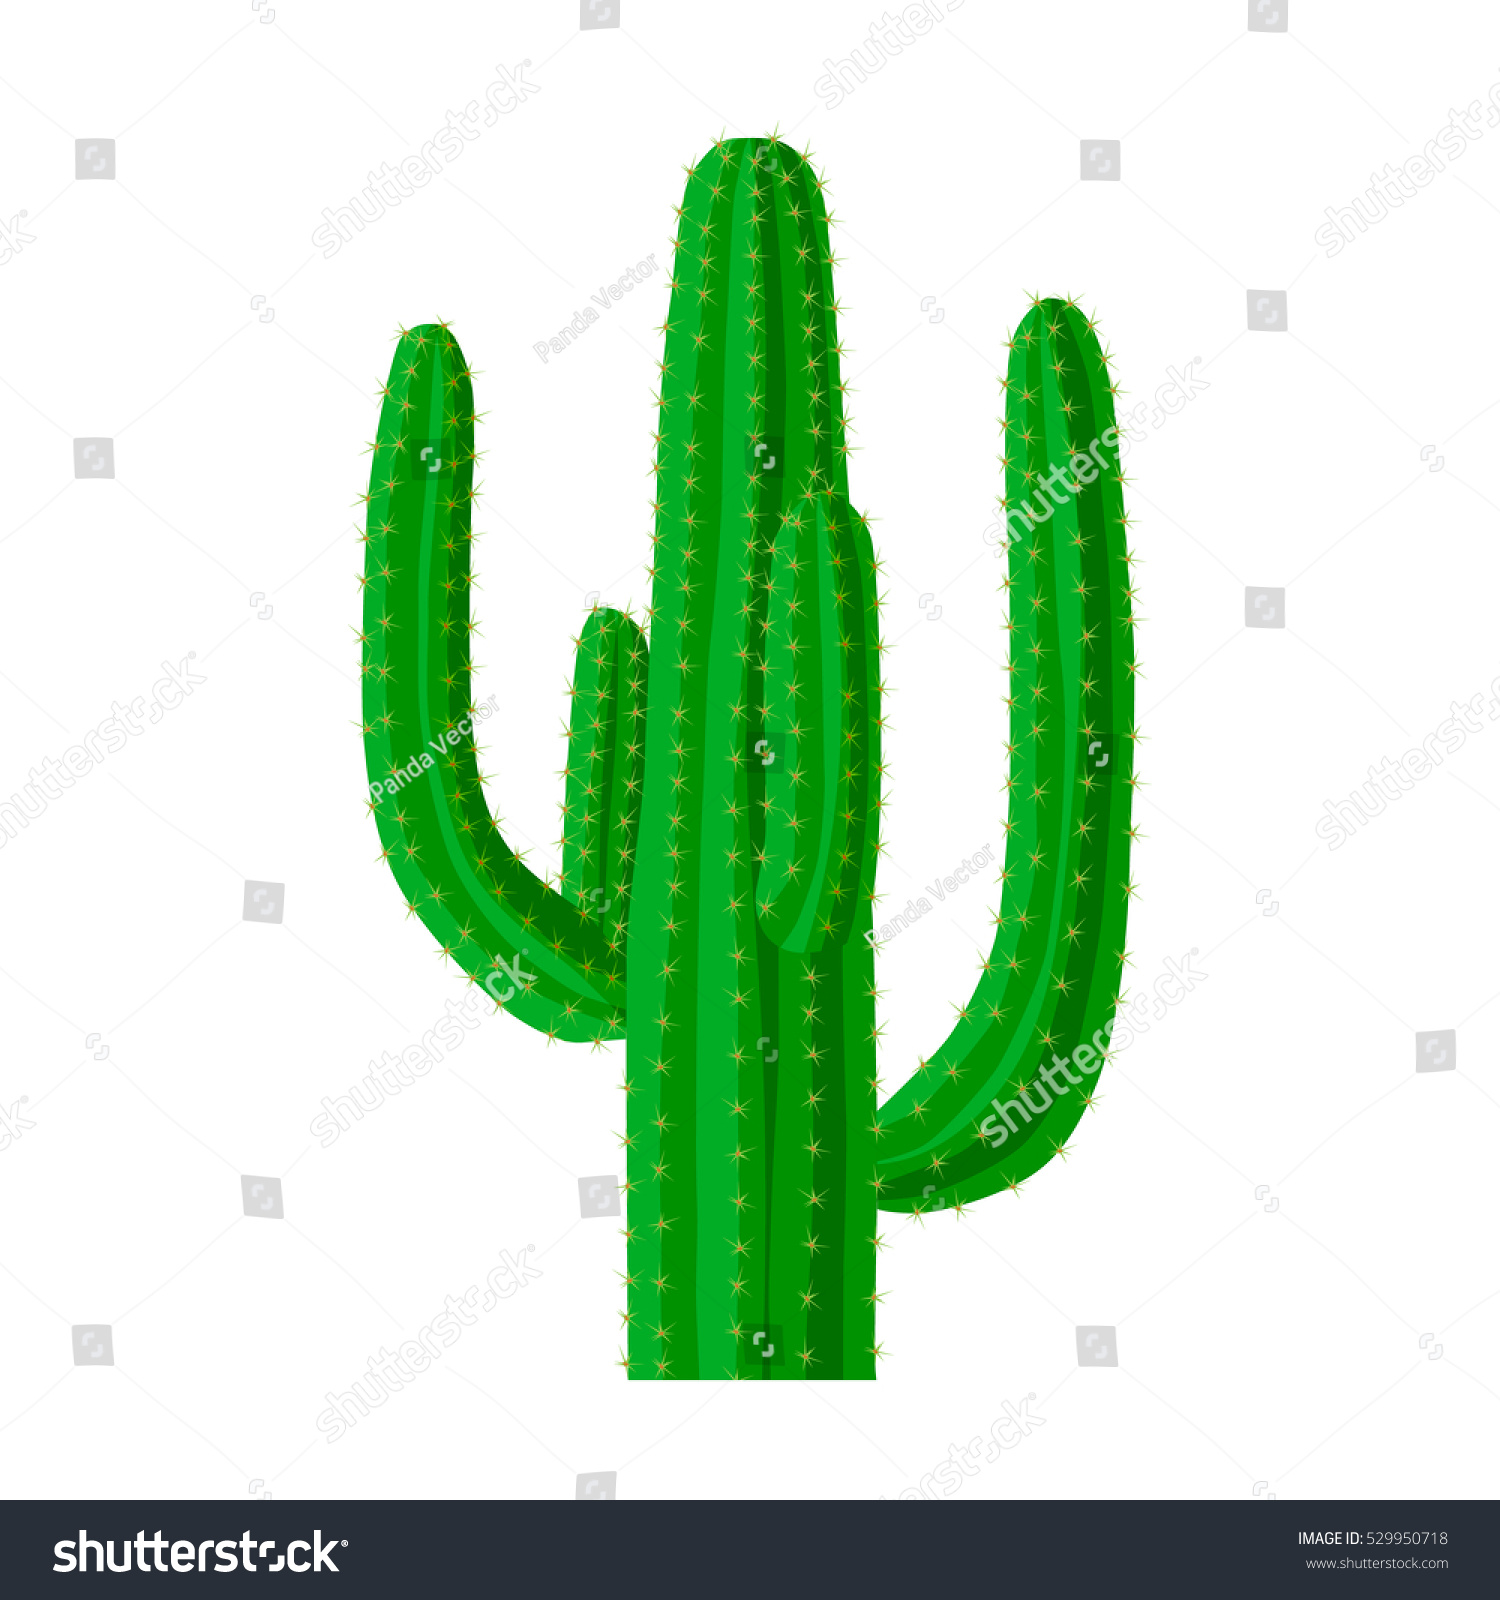 SVG of Mexican cactus icon in cartoon style isolated on white background. Mexico country symbol stock vector illustration. svg